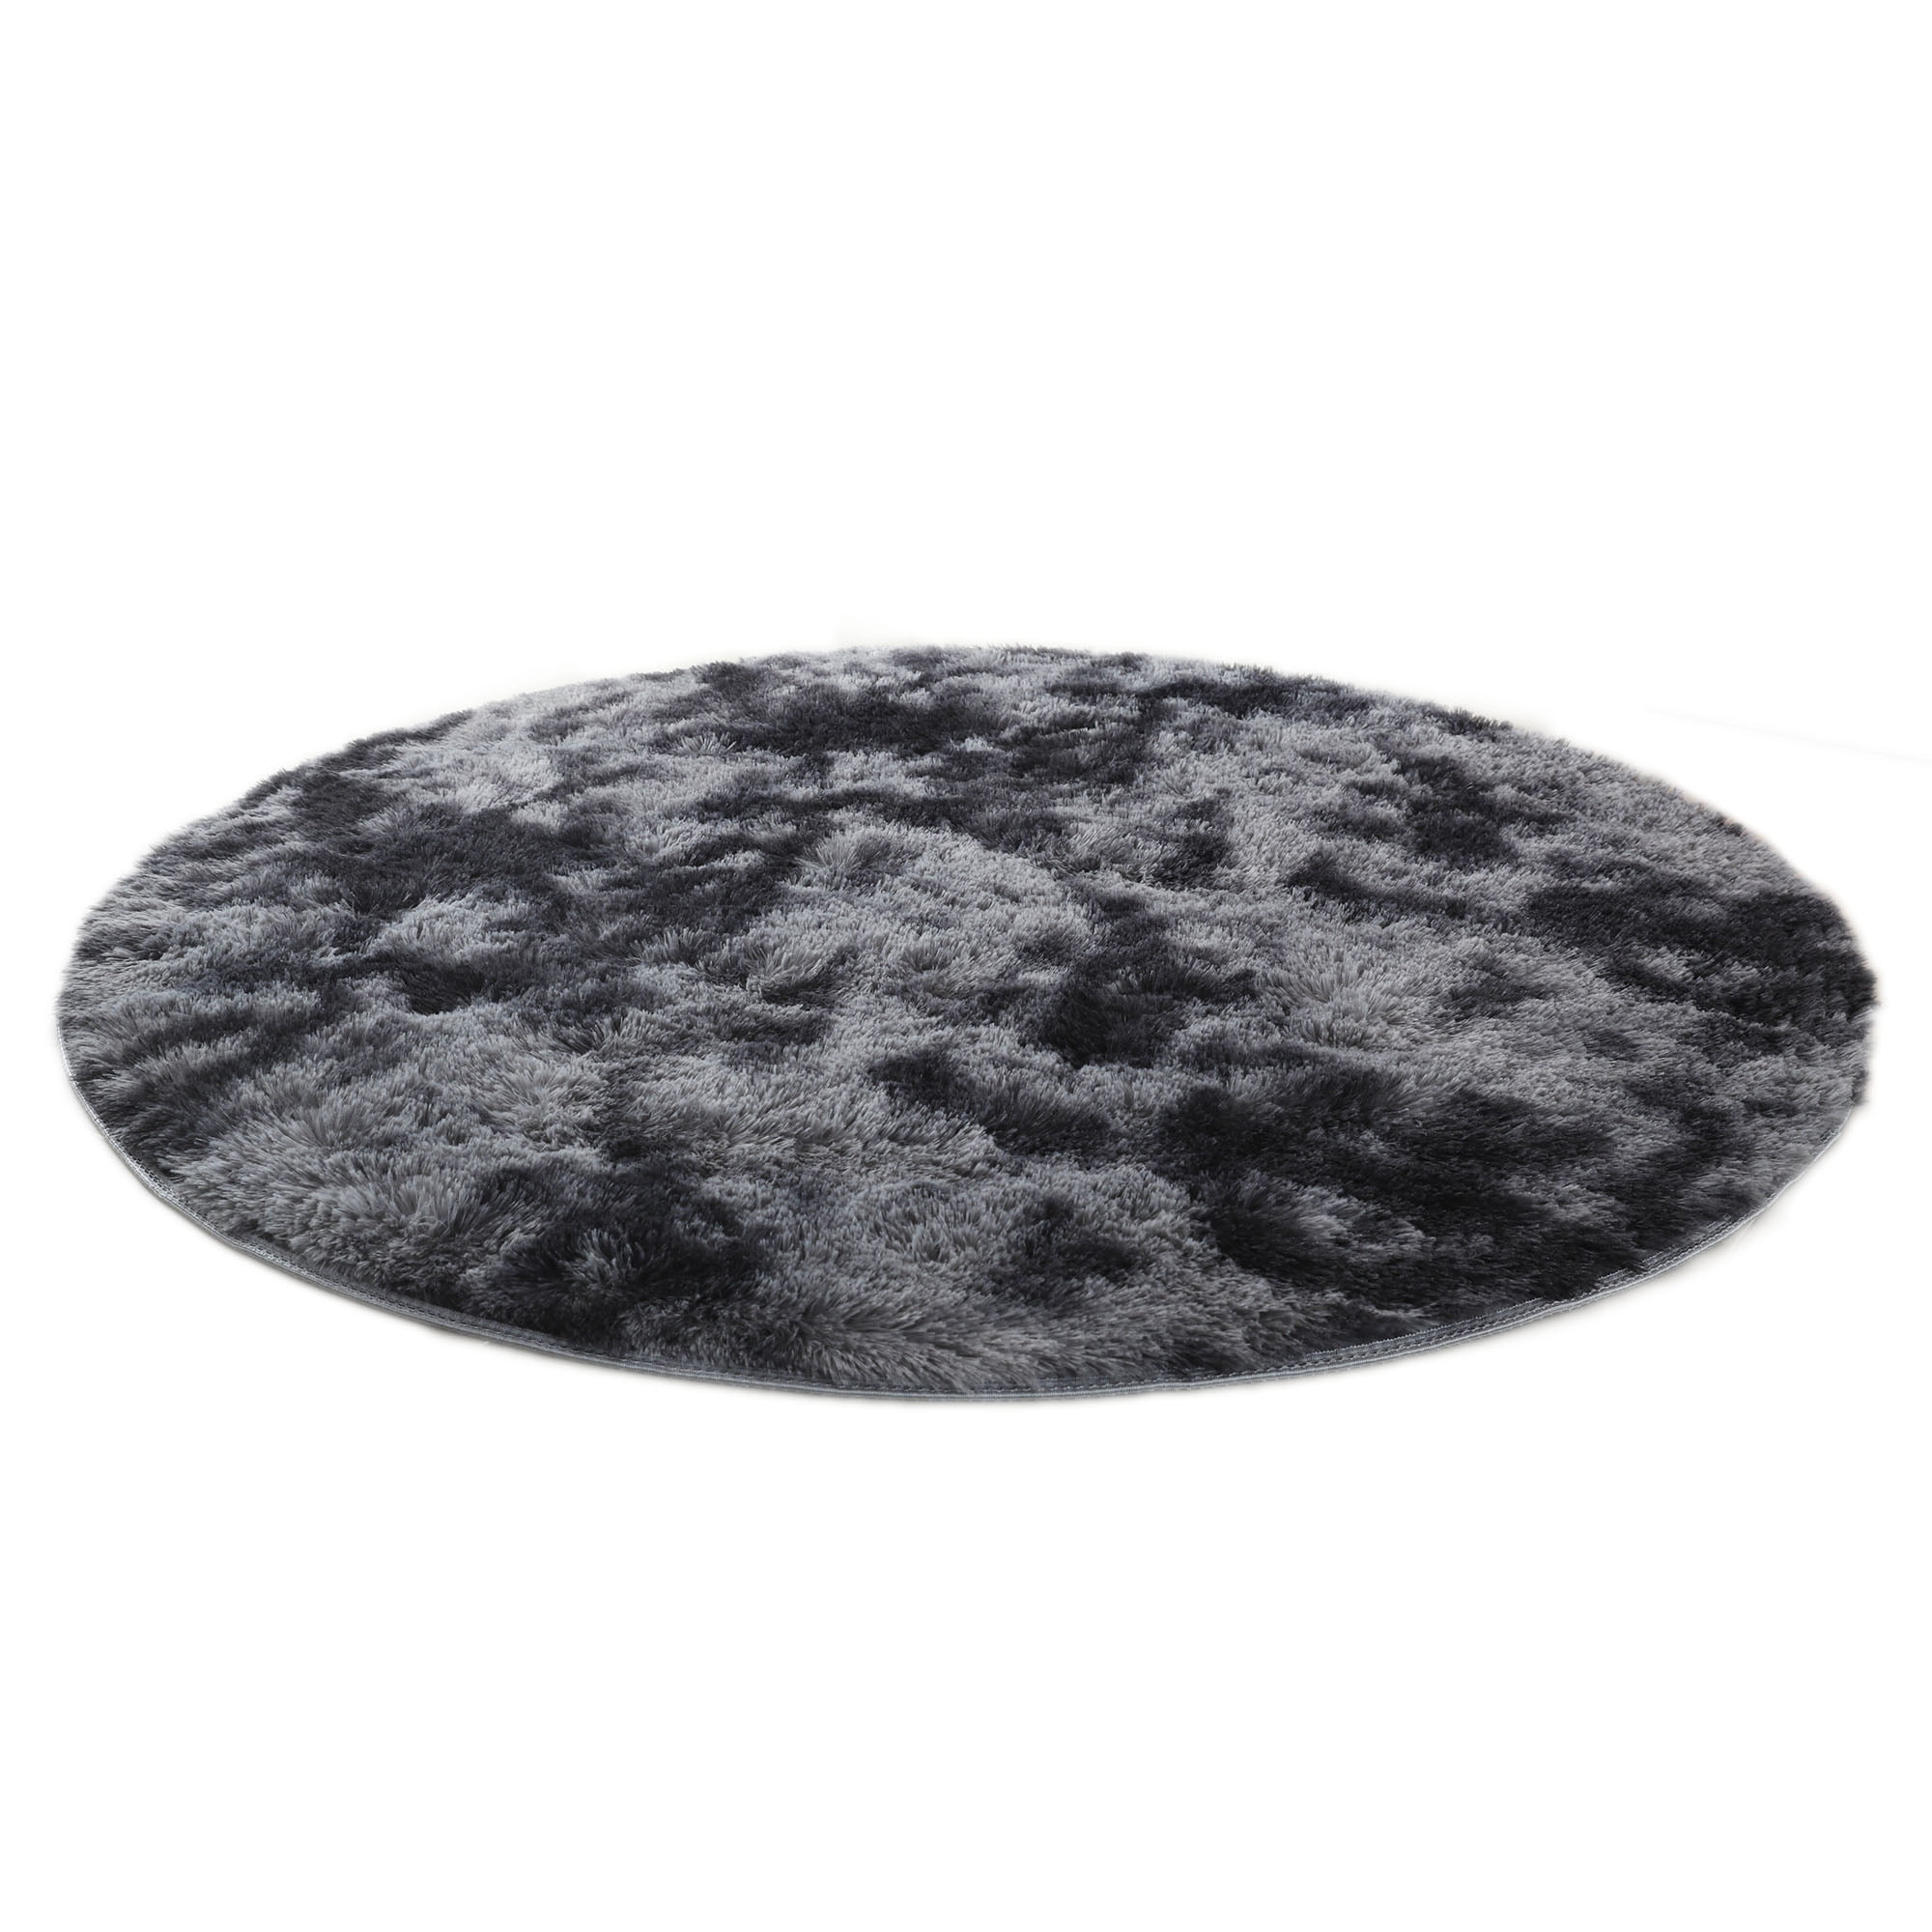 Youloveit Round Fluffy Soft Area Rugs For Kids Room Plush Gy Carpet Cute Circle Rug Boys Girls Bedroom Living Home Decor Circular 4x4ft 5 3x5 3ft 6x6ft Com